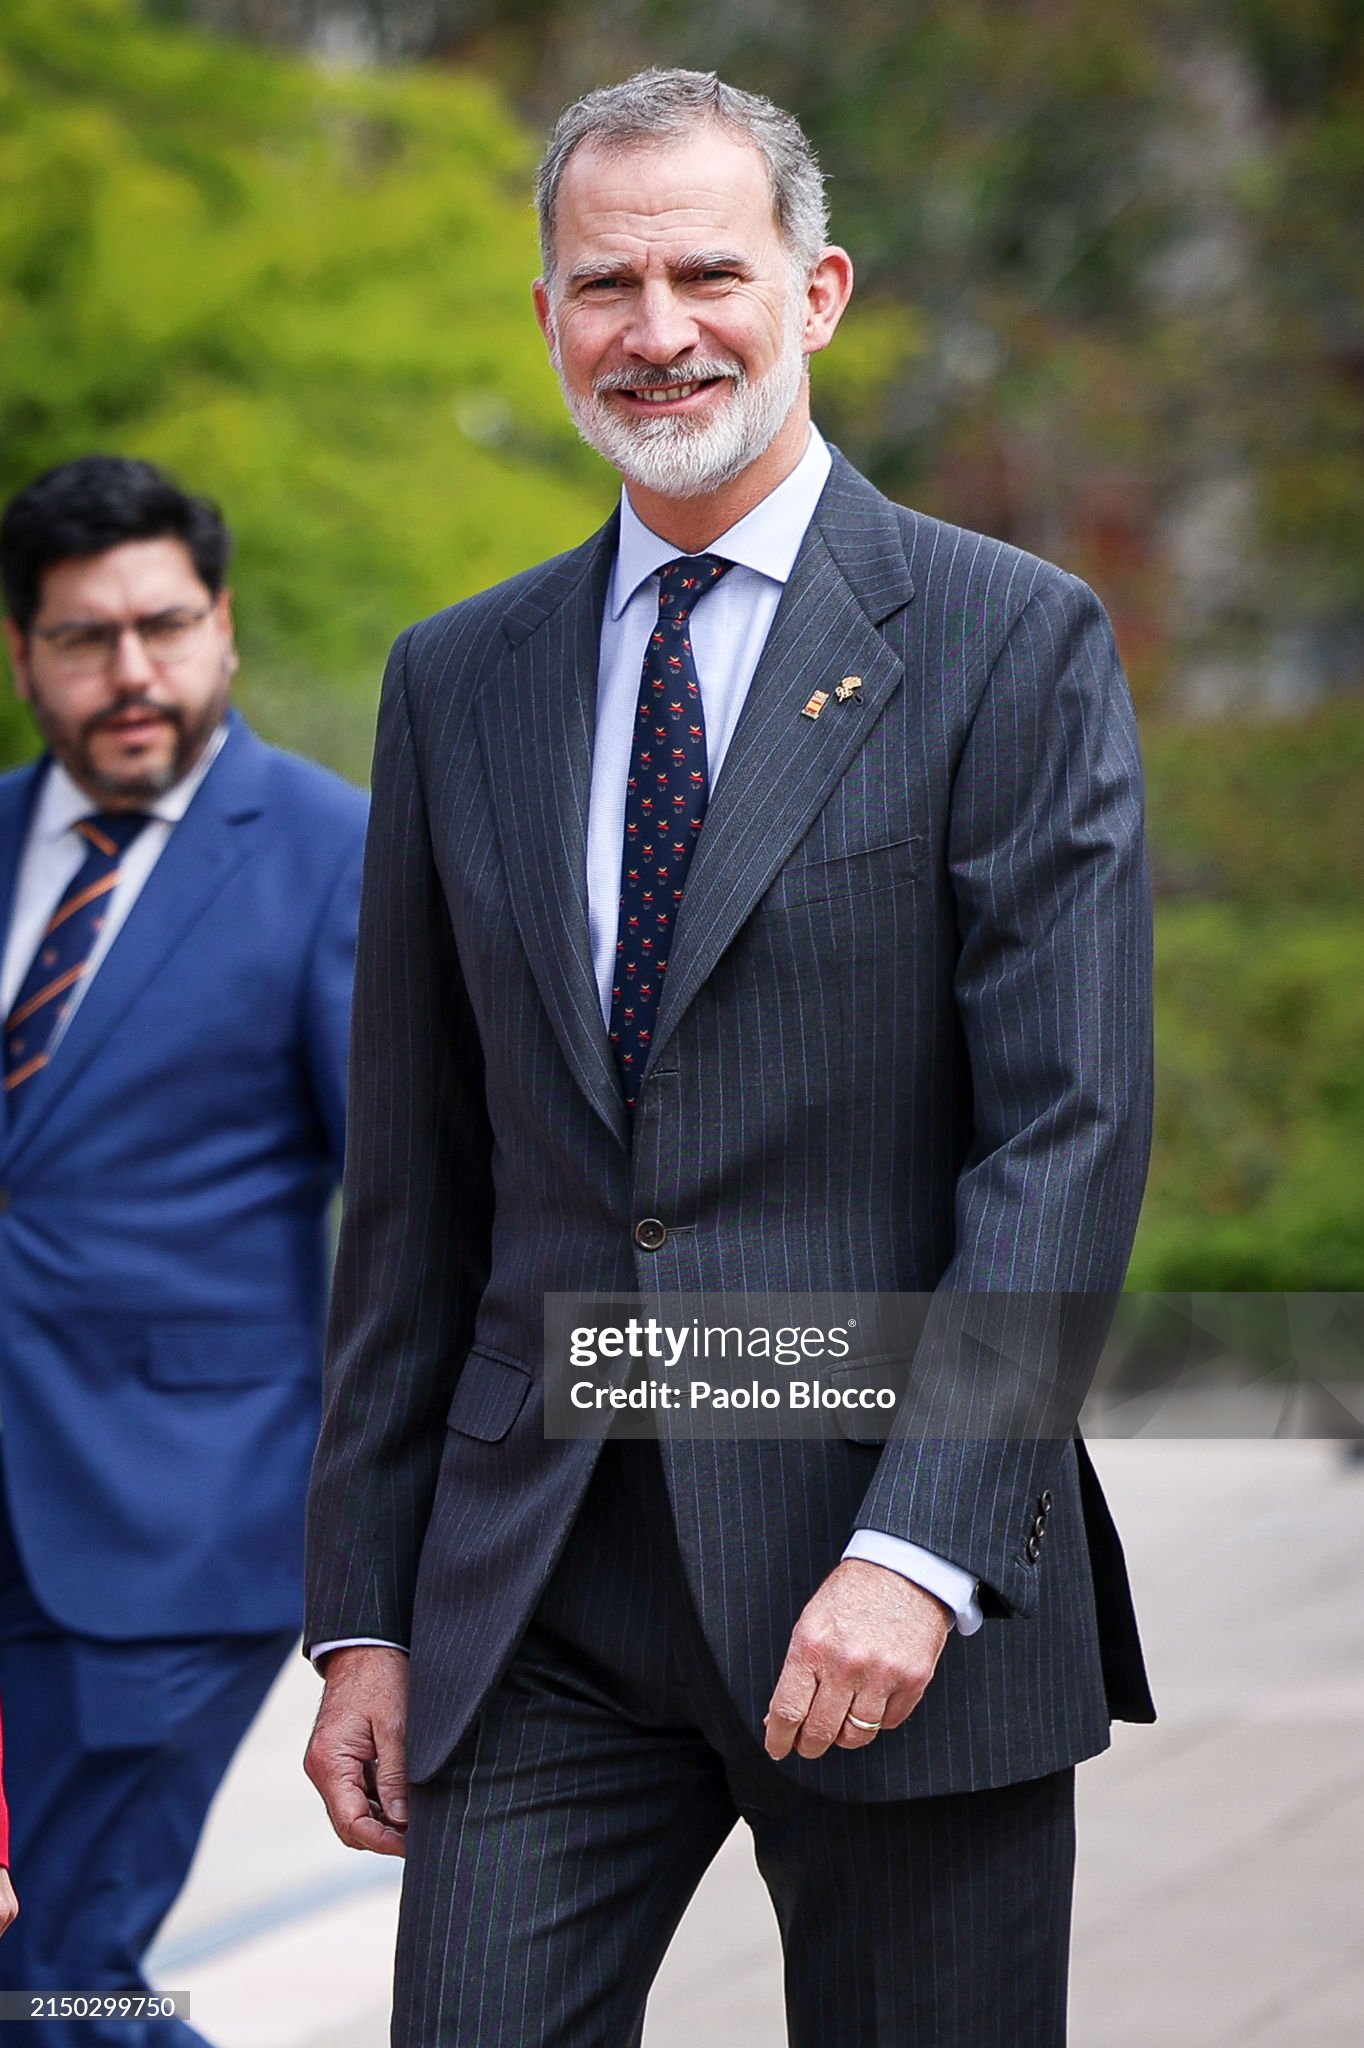 spanish-royals-attend-a-commemorative-act-for-the-spanish-participation-in-the-olympic-games.jpg?s=2048x2048&w=gi&k=20&c=CHFuN4hjRLP3XFrBNGYfQYKi8XQ8G6eT7MJGRbrVdZw=